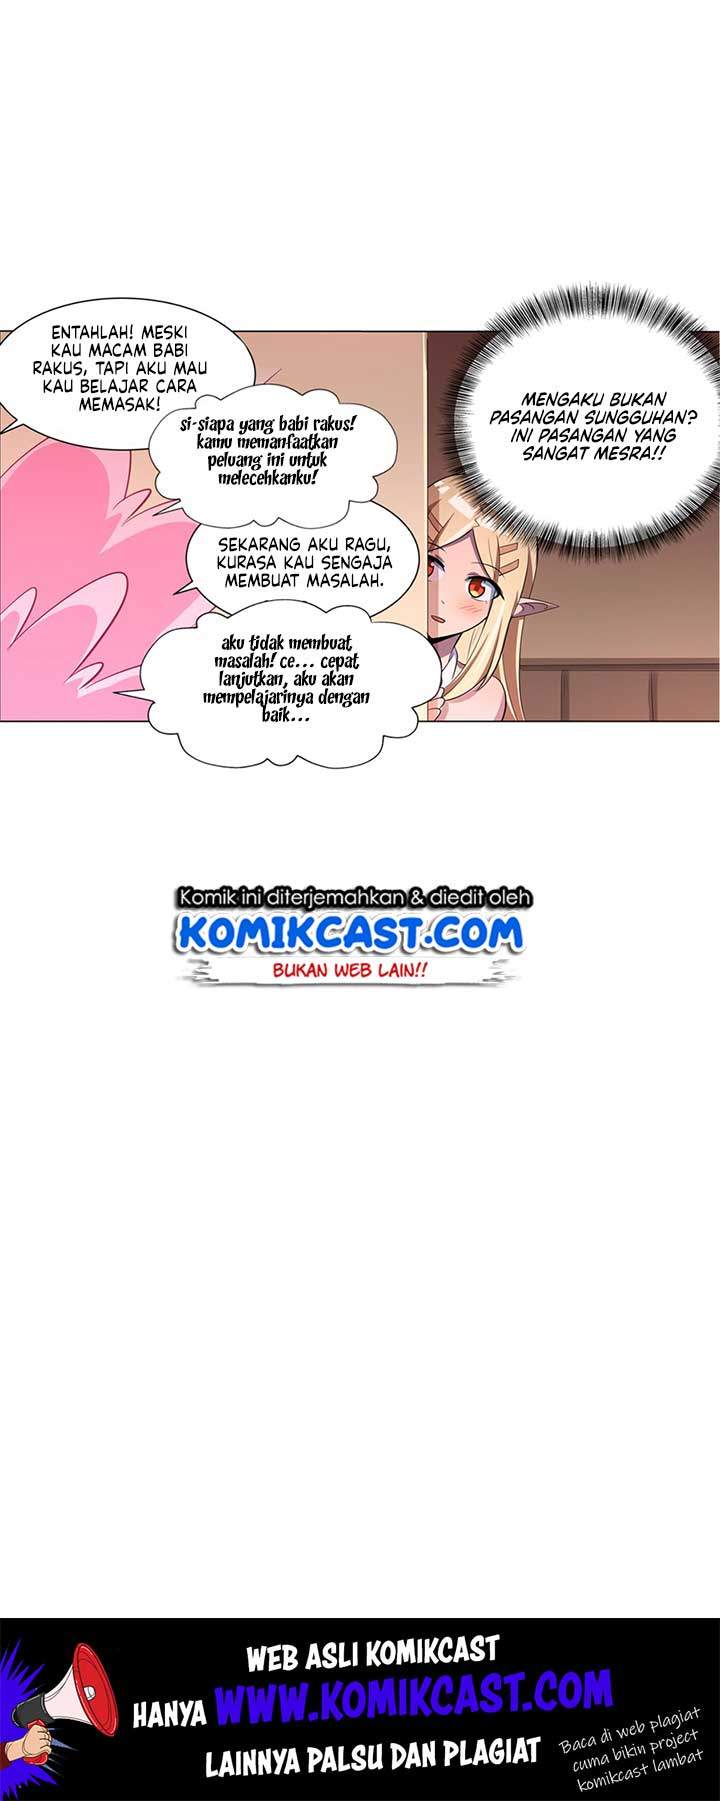 The Demon King Who Lost His Job Chapter 74 Bahasa Indonesia